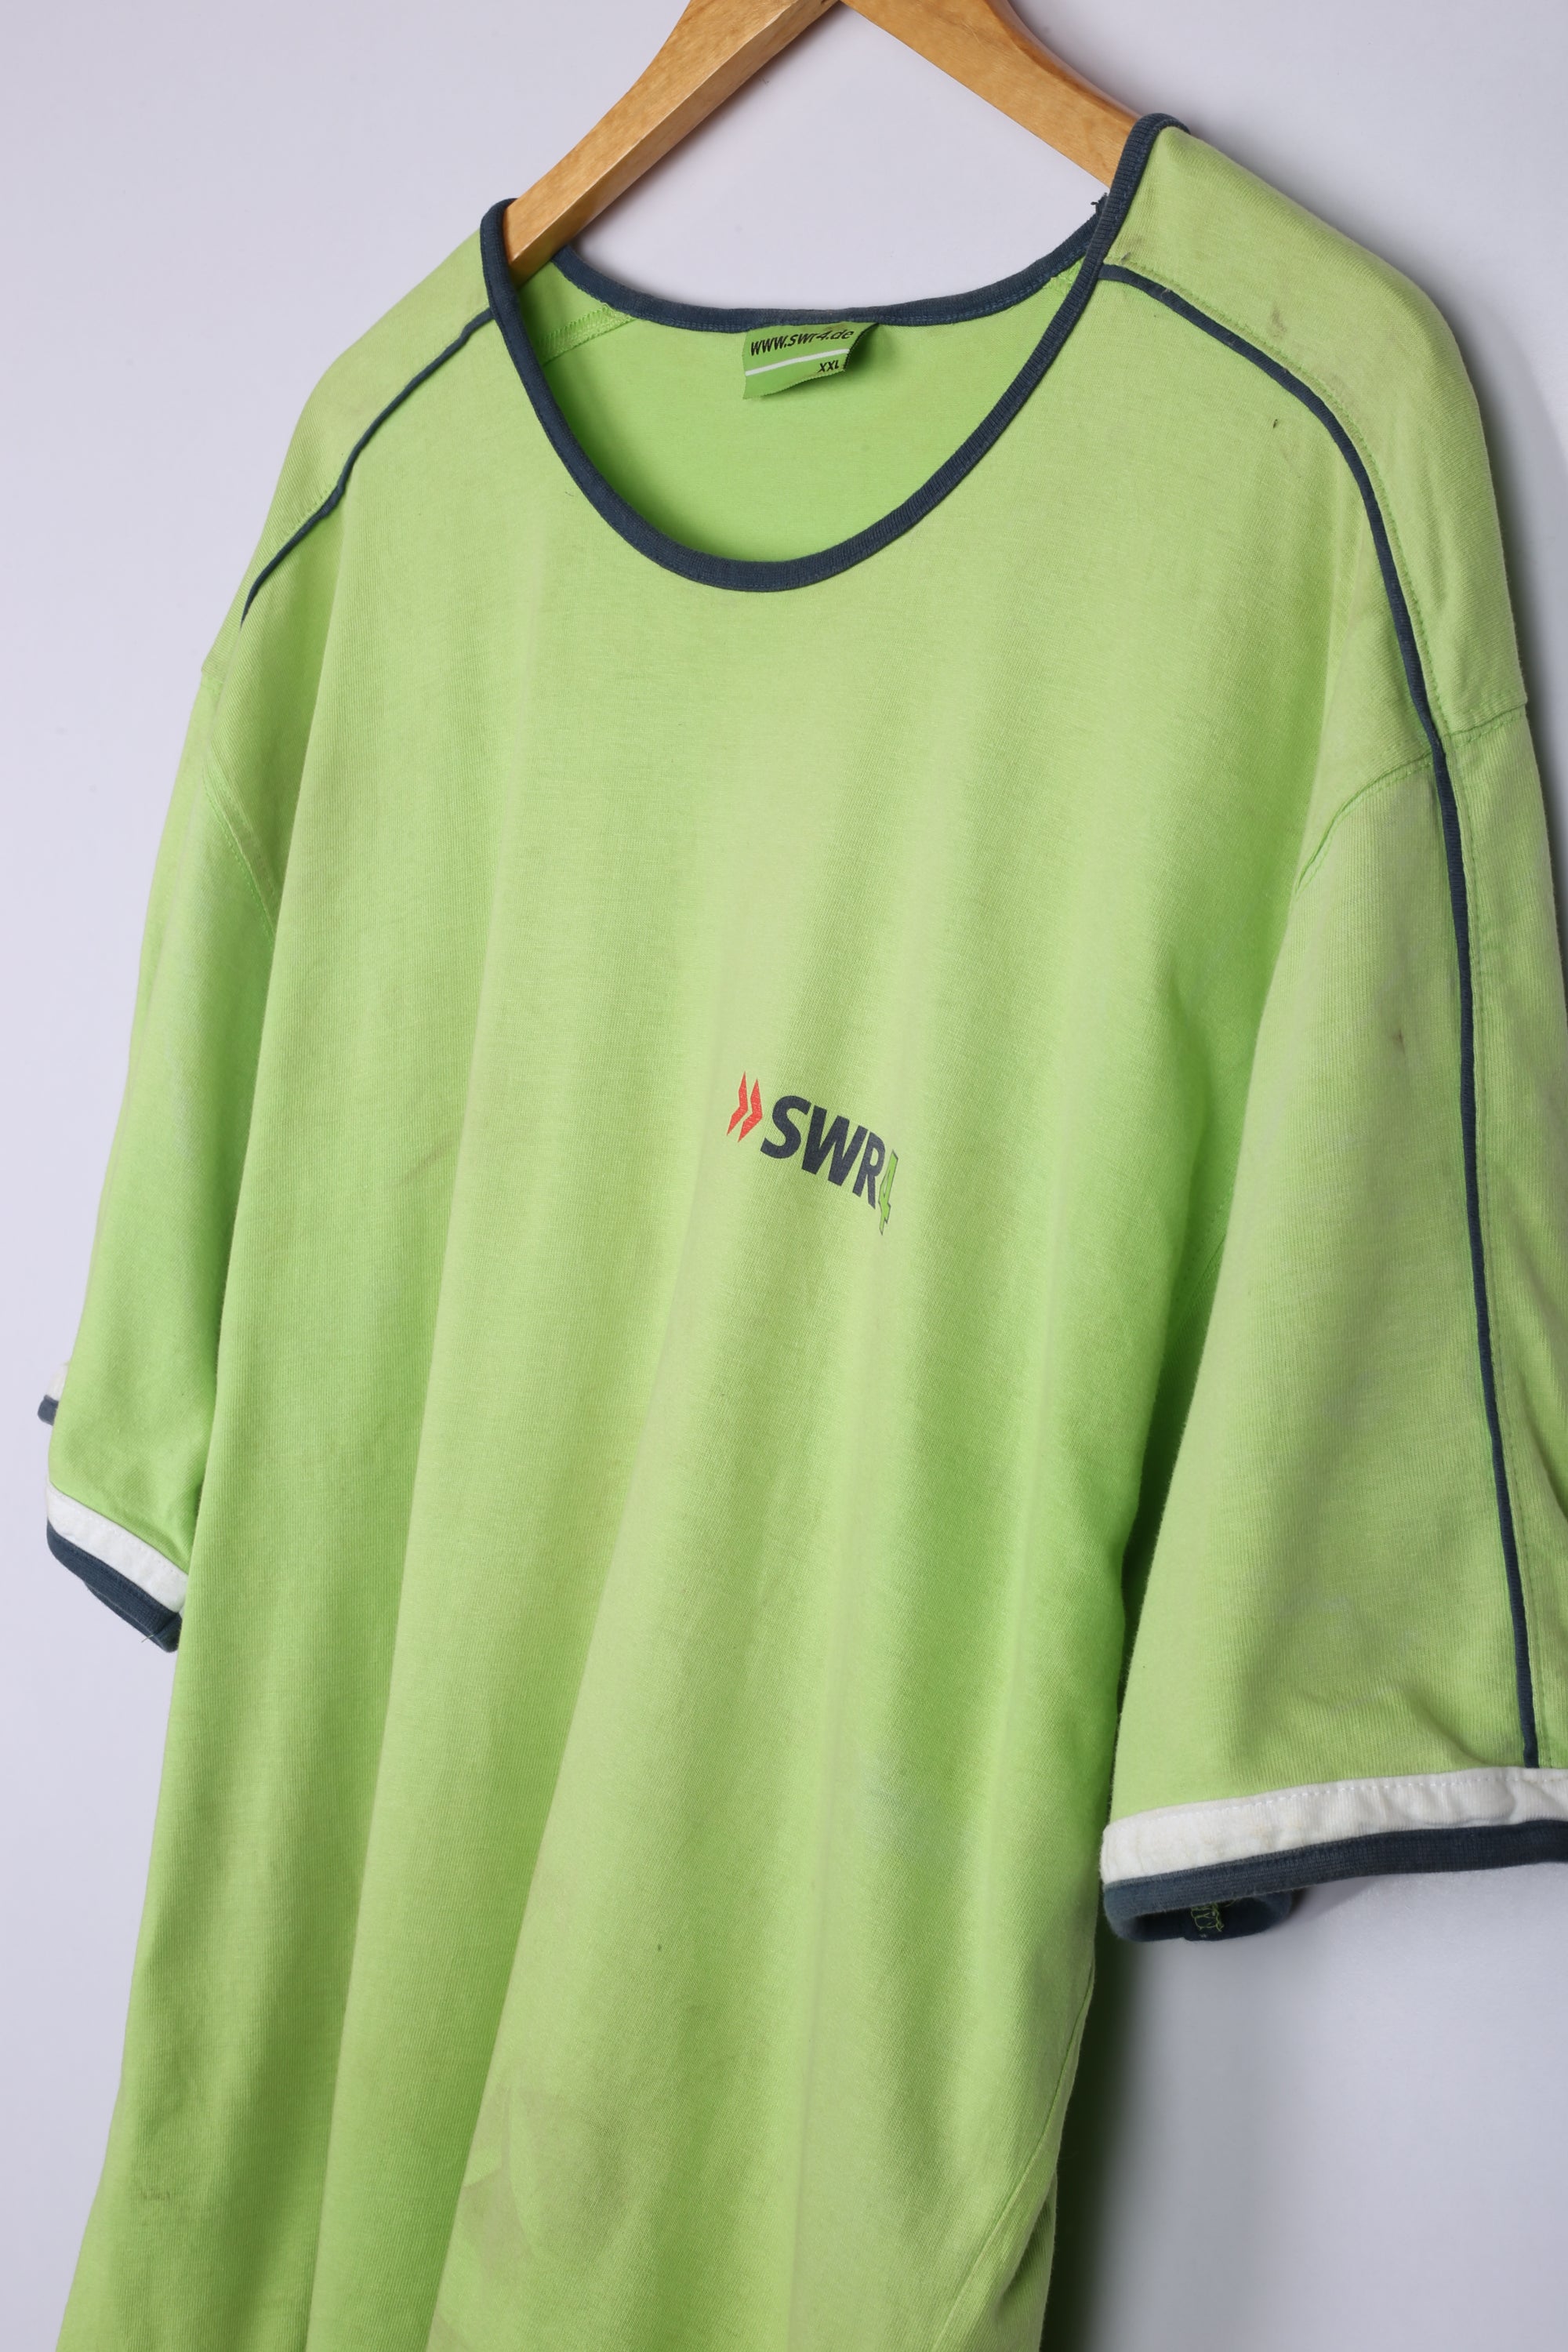 Vintage SWR 2 Graphic Tee Lime XX Large